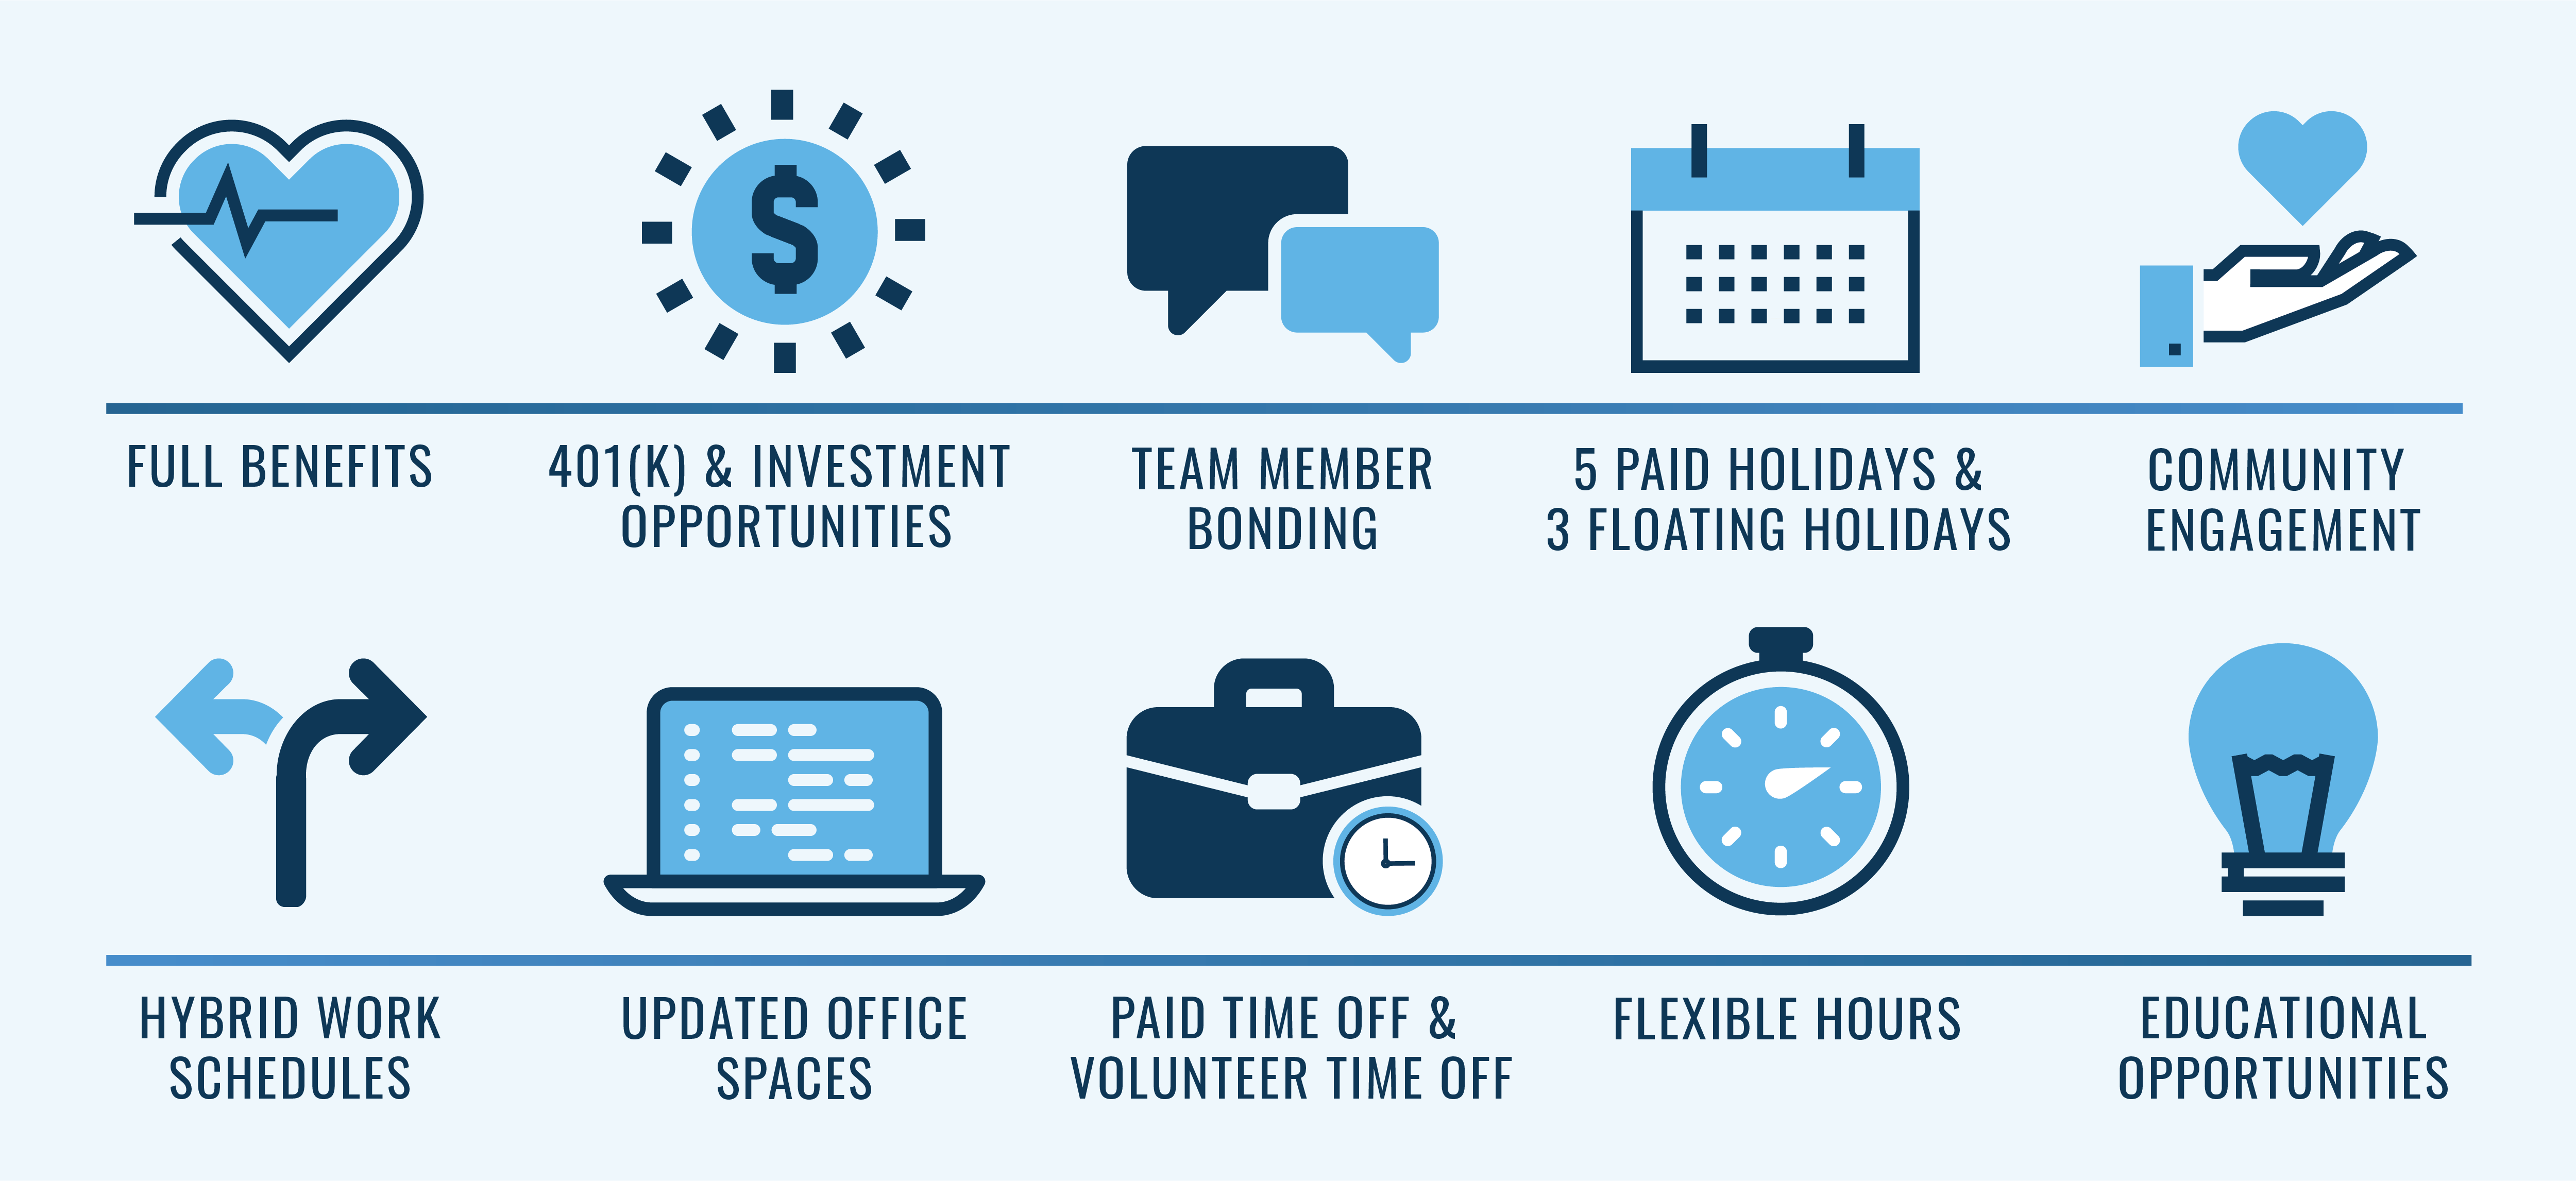 Benefits Overview - Full Benefits, 401(k) & Investment Opportunities, Team Member Bonding, 5 Paid Holidays & 3 Floating Holidays, Community Engagement, Hybrid Work Schedules, Updated Offices Spaces, Start With, Paid Time Off & Volunteer Time Off, Flexible Hours, Educational Opportunities